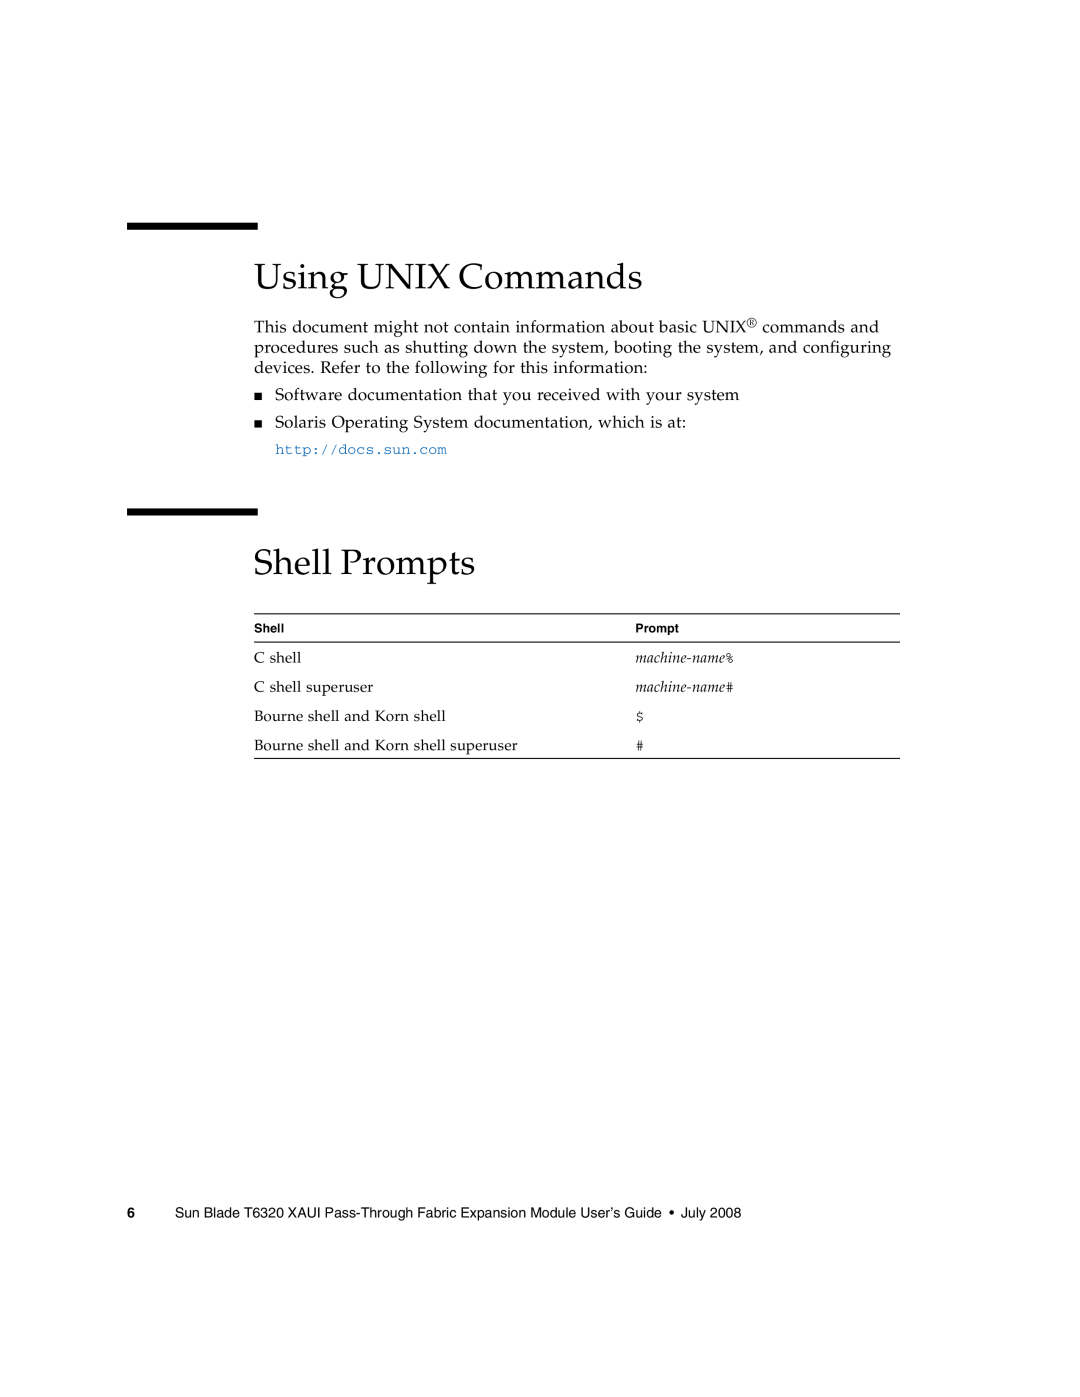 Sun Microsystems T6320 manual Using UNIX Commands, Shell Prompts 